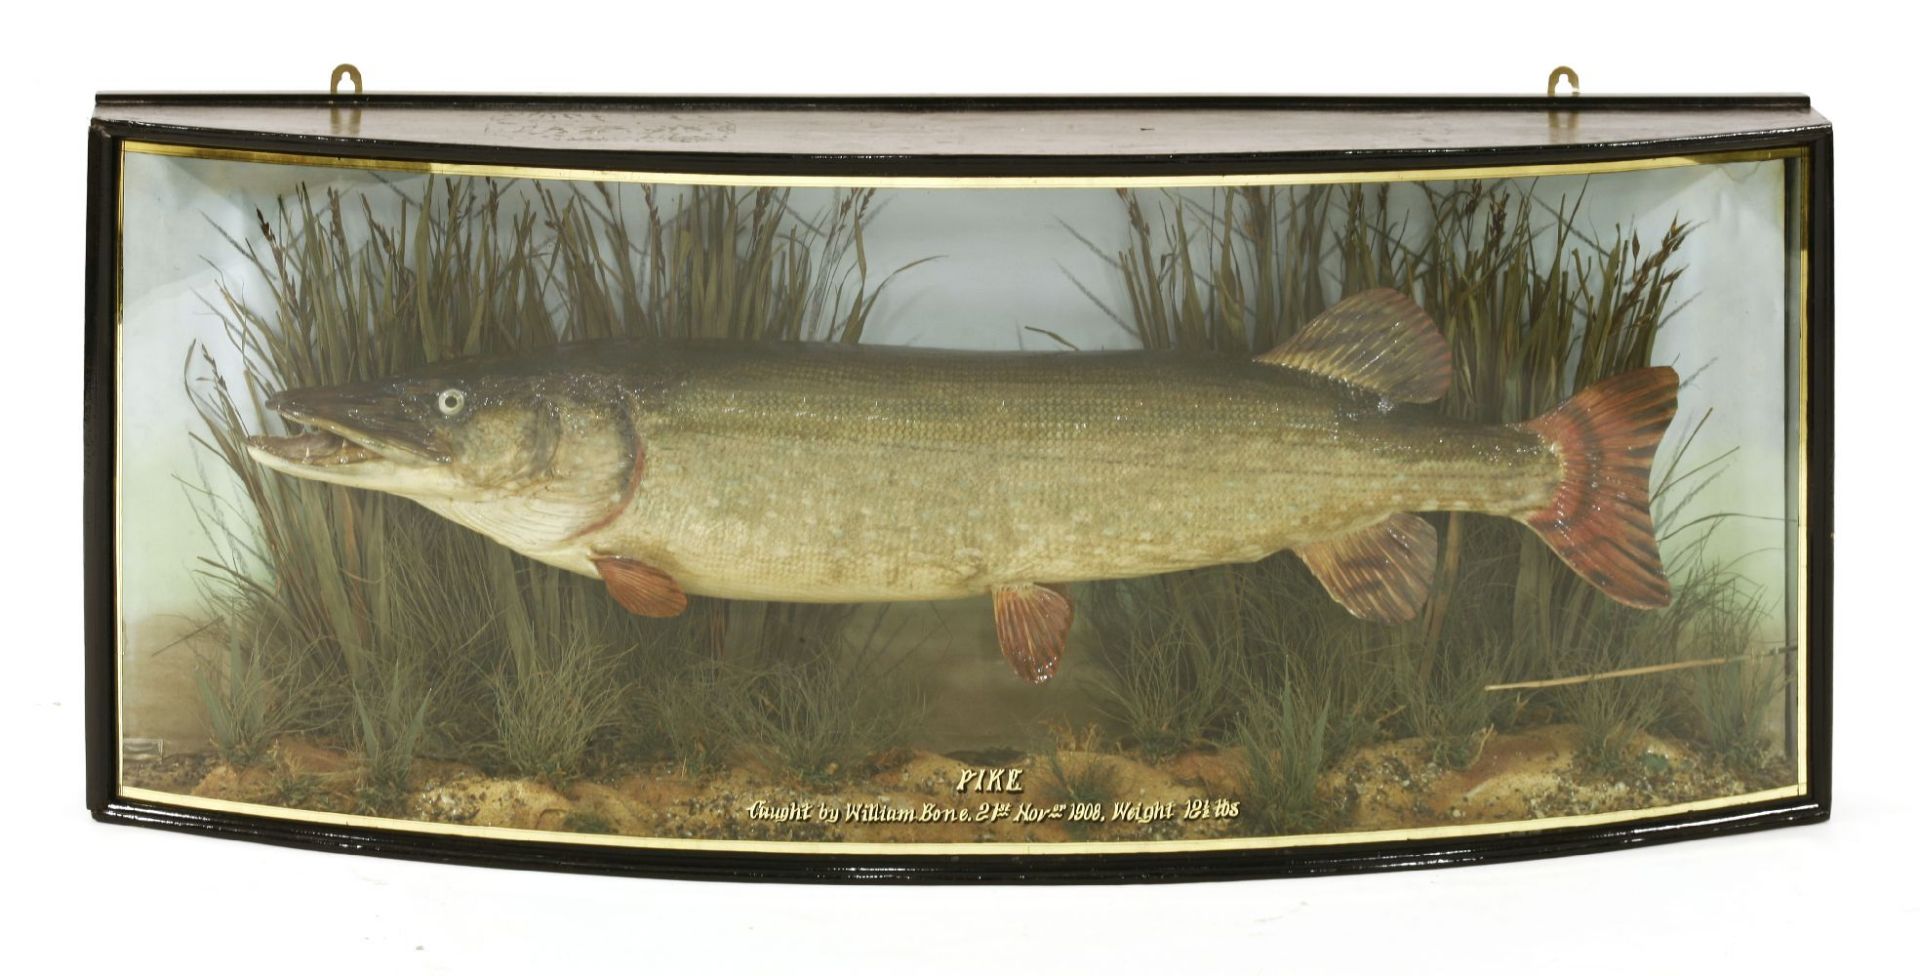 A preserved pike,by W F Homer, in a bow front glazed case, inscribed 'Pike caught by William Bone,